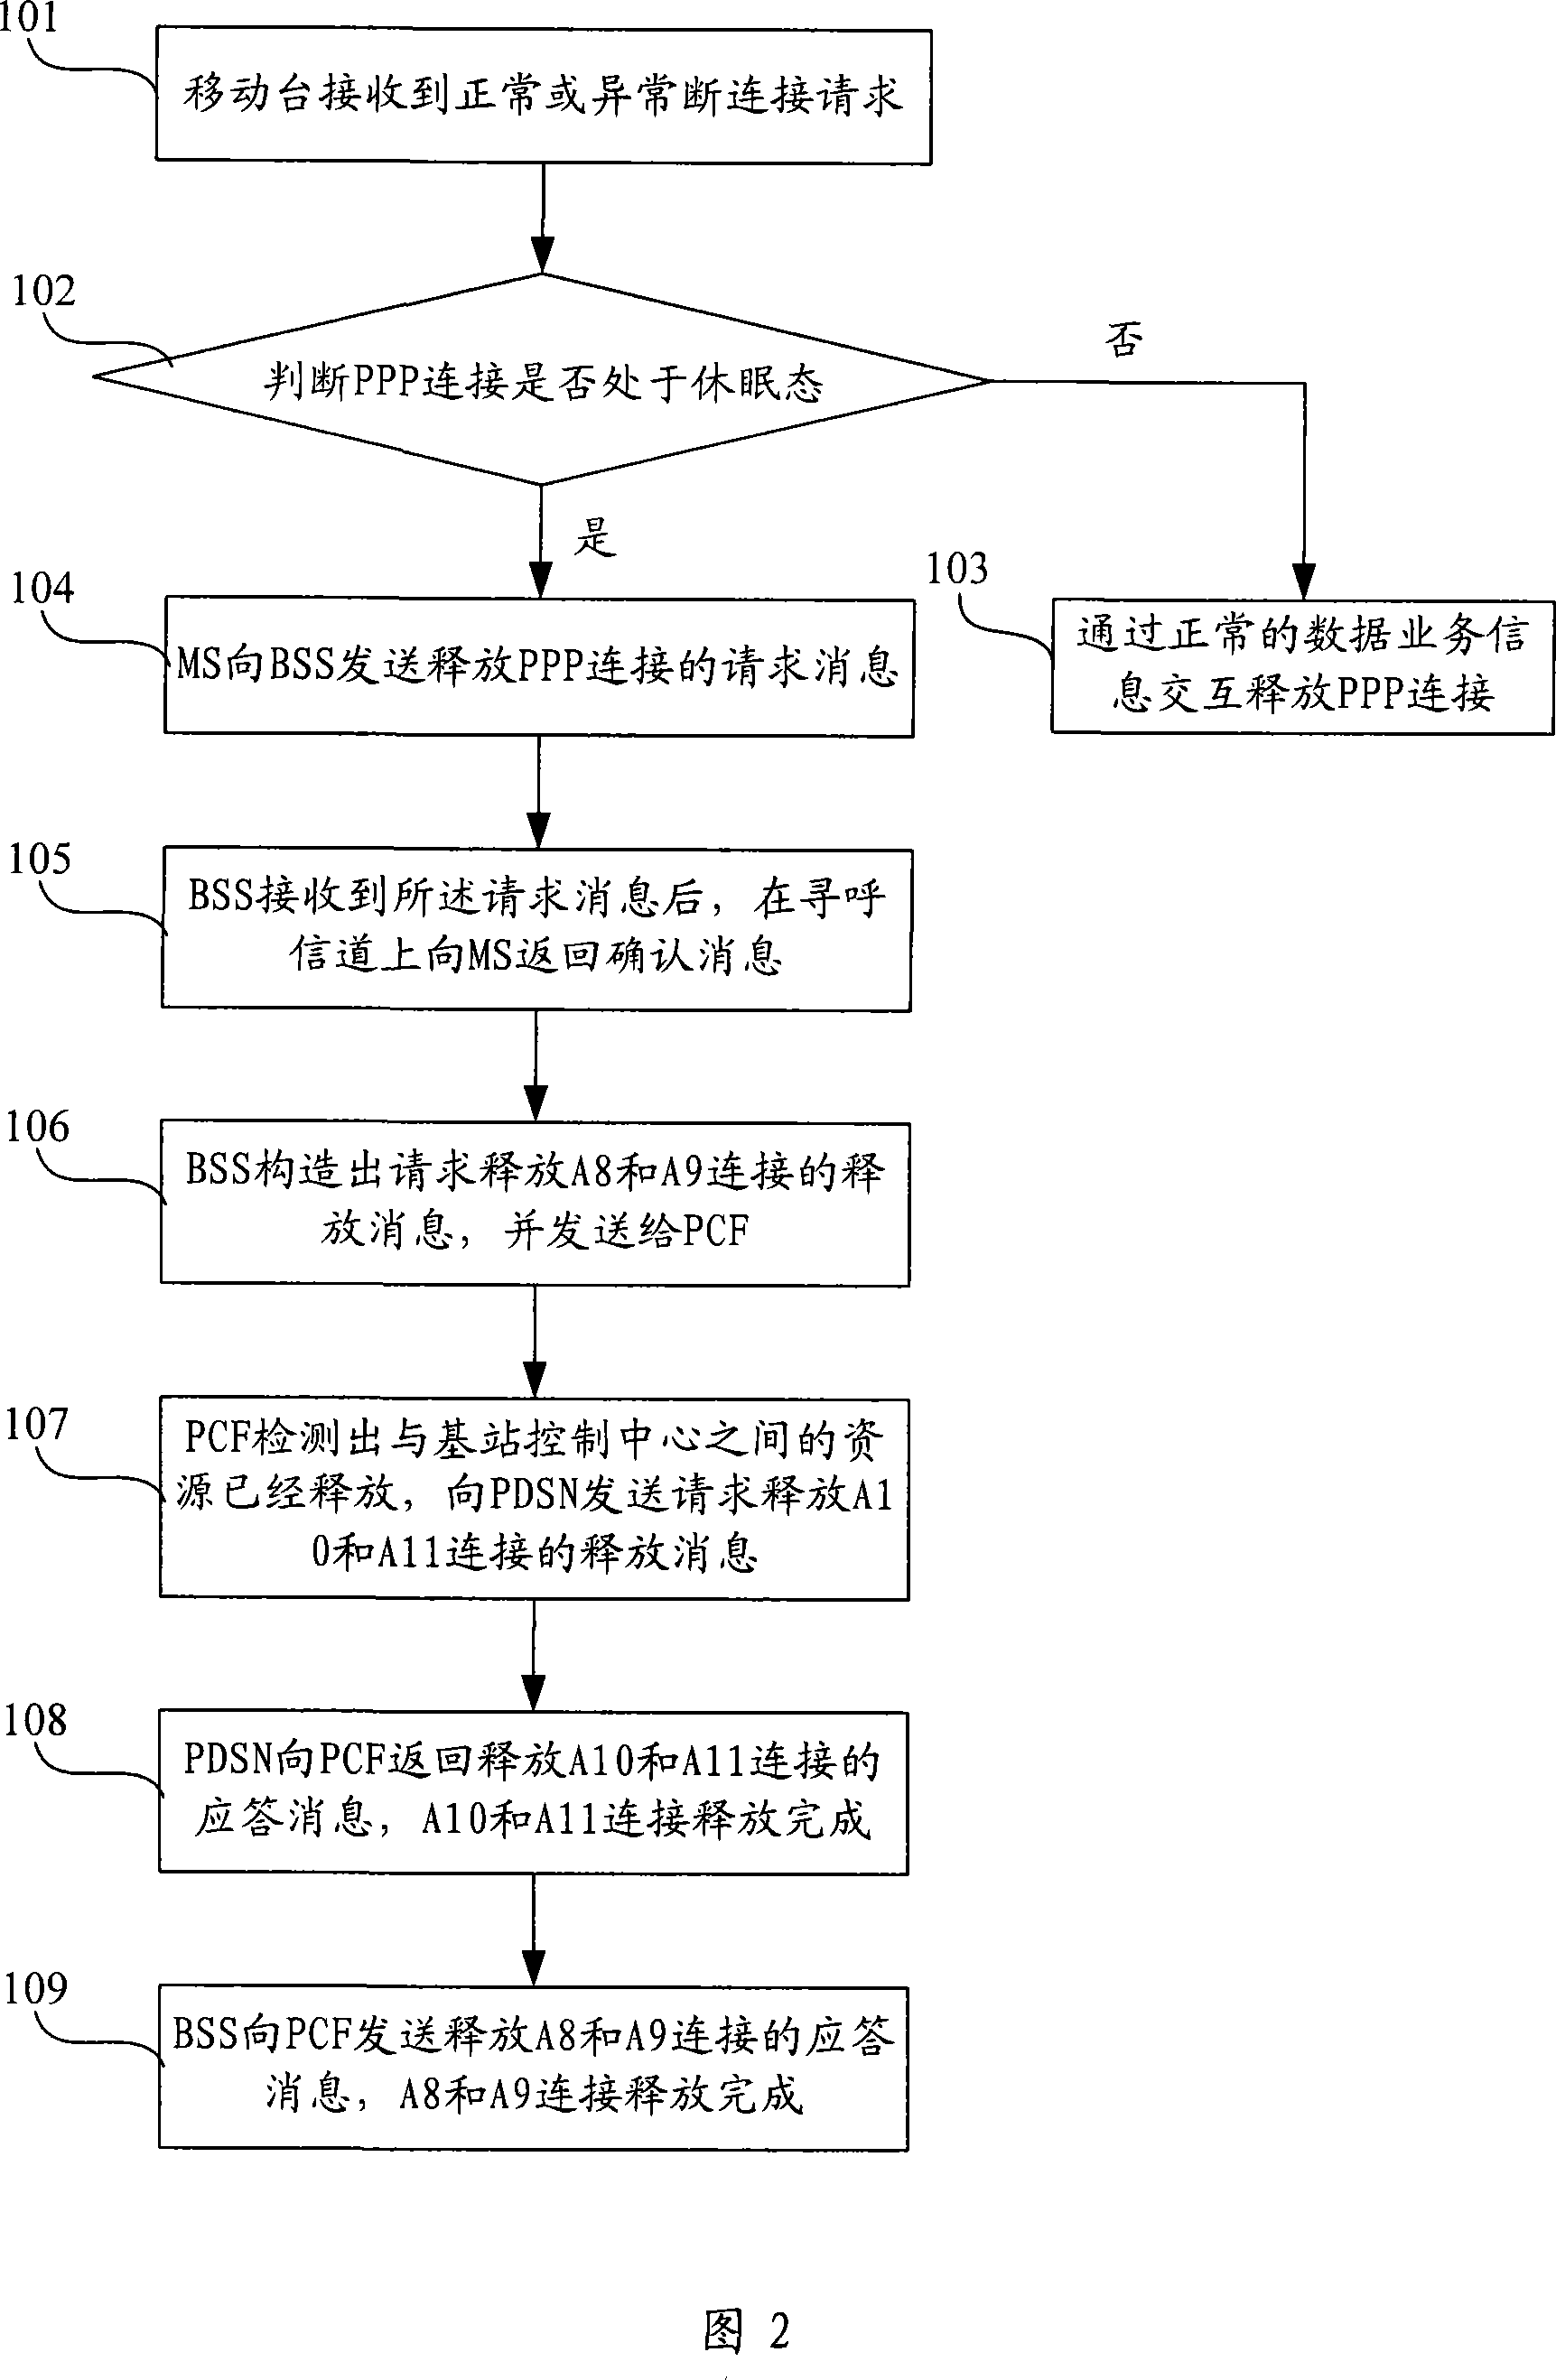 Service connection releasing method, system and mobile station, base station subsystem